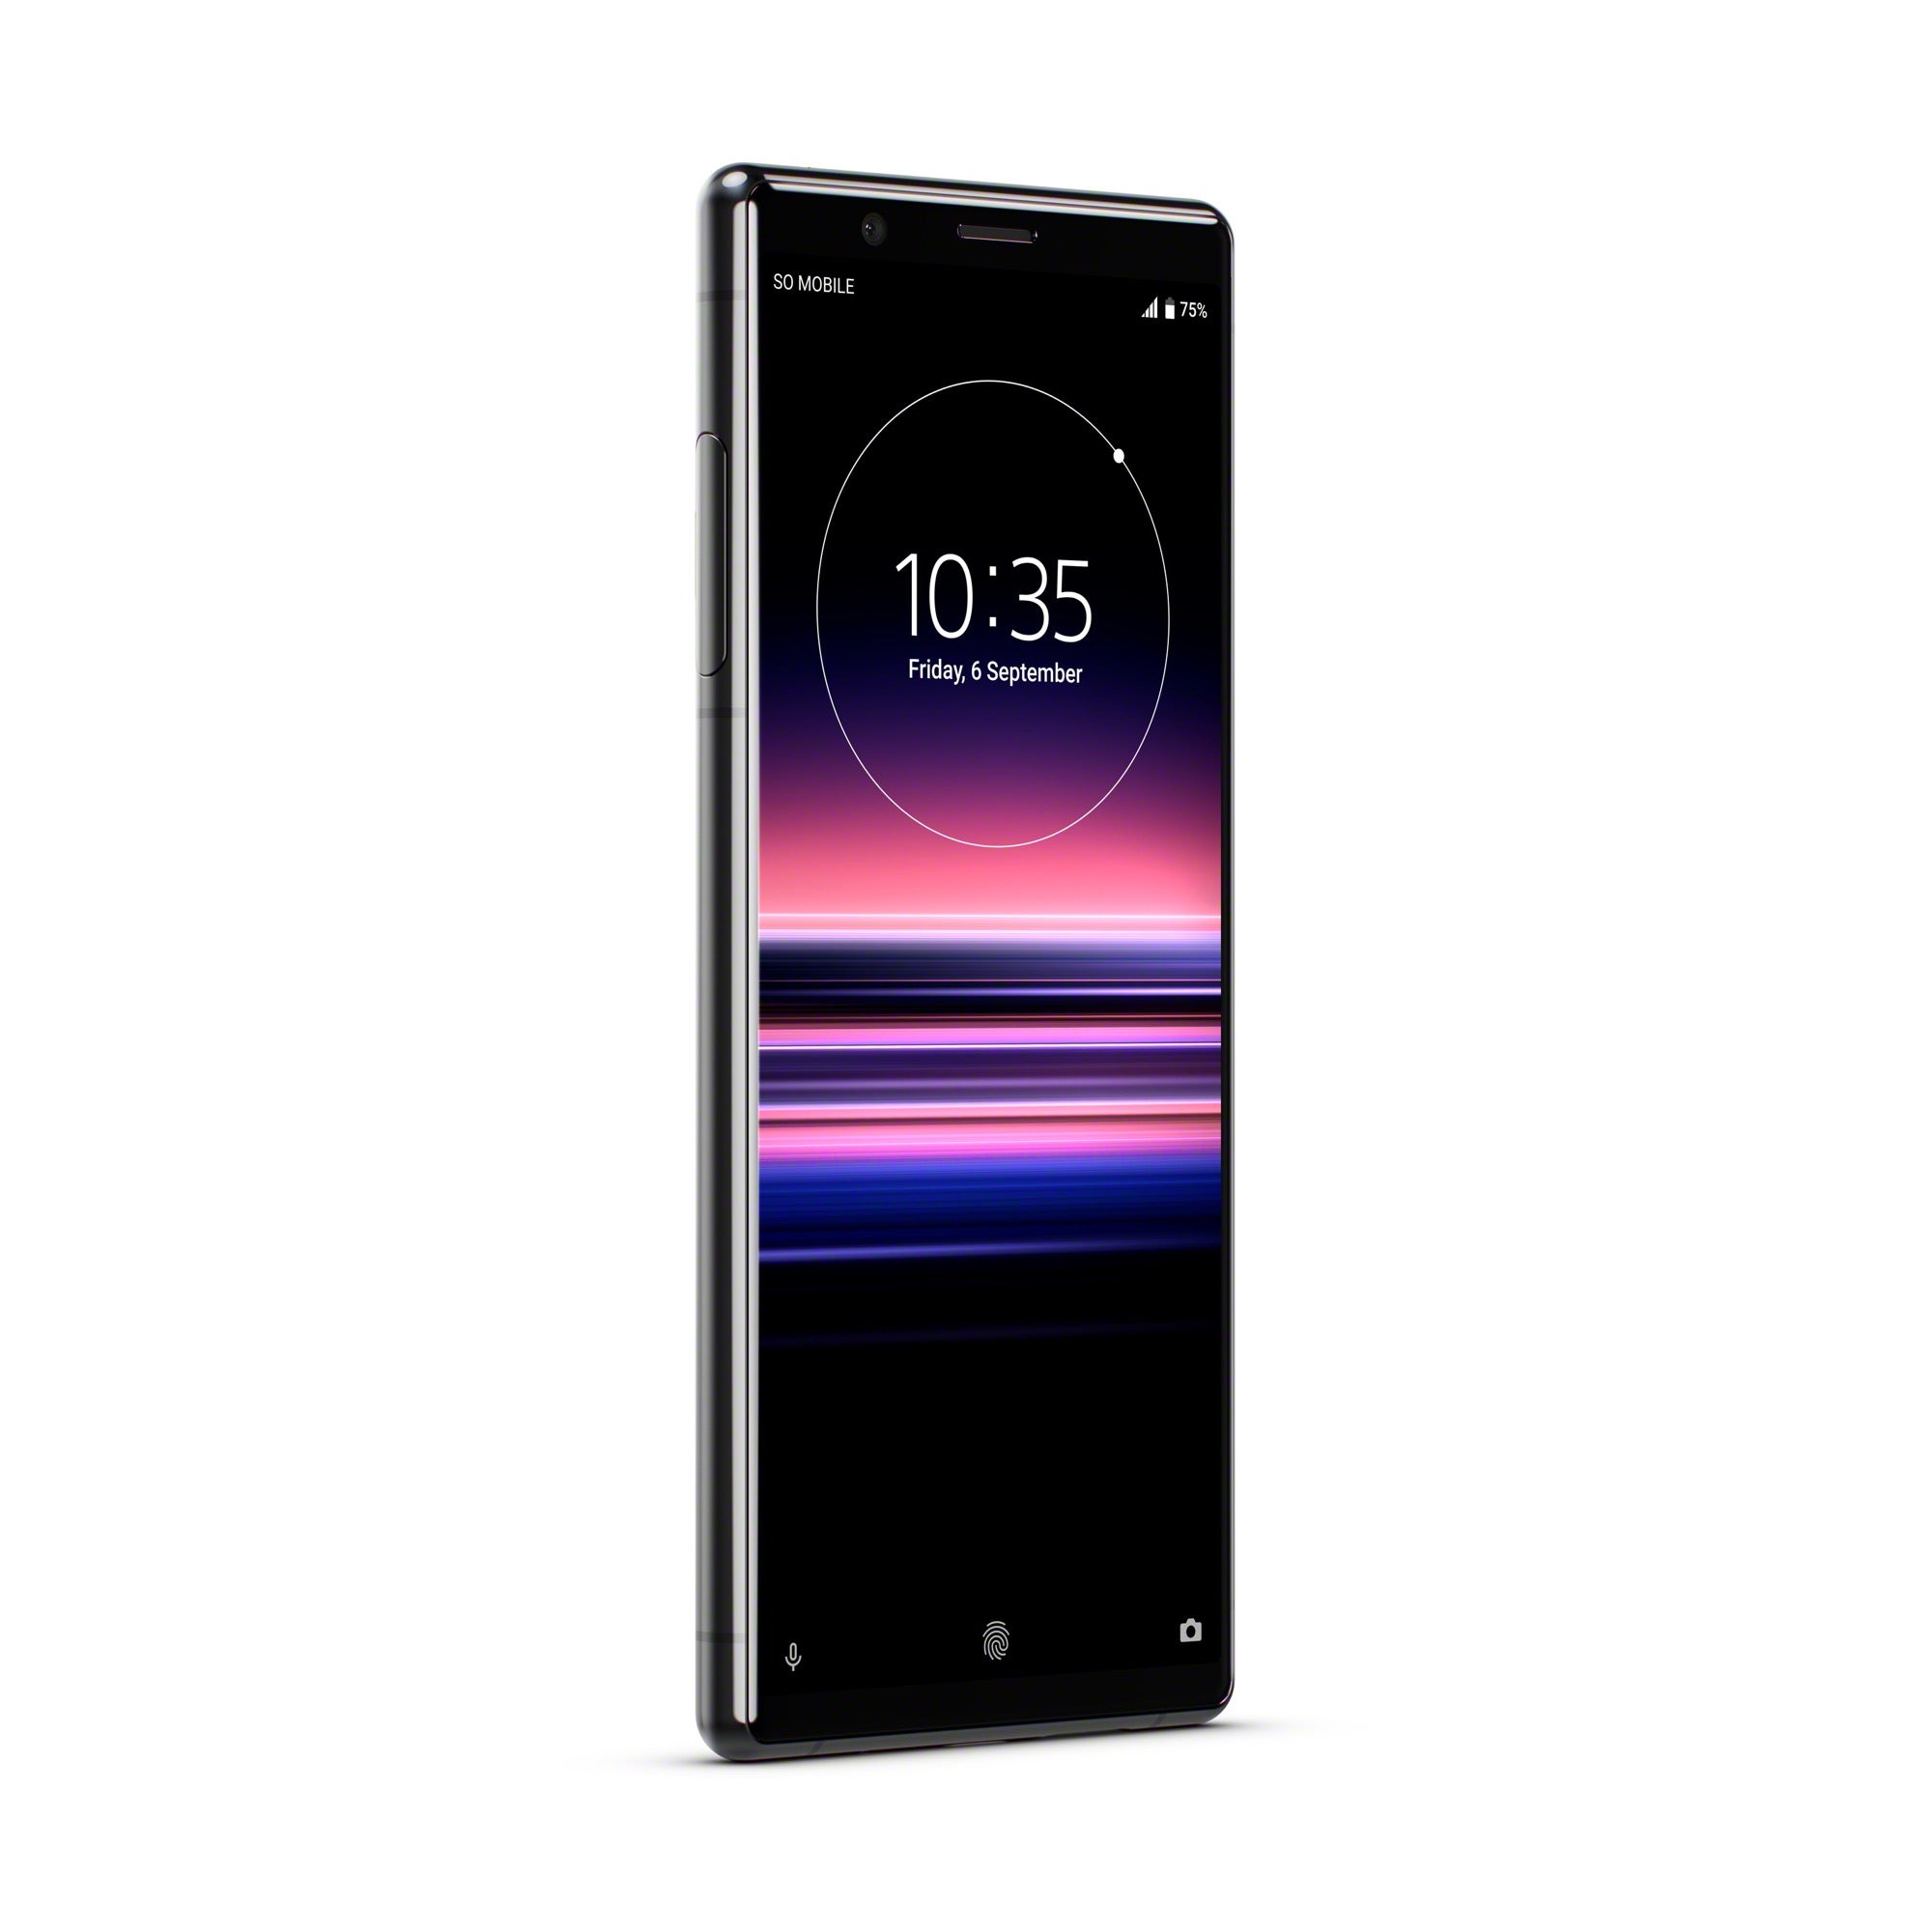 IFA 2023: Sony launches Xperia 5 V and the camera blew my mind